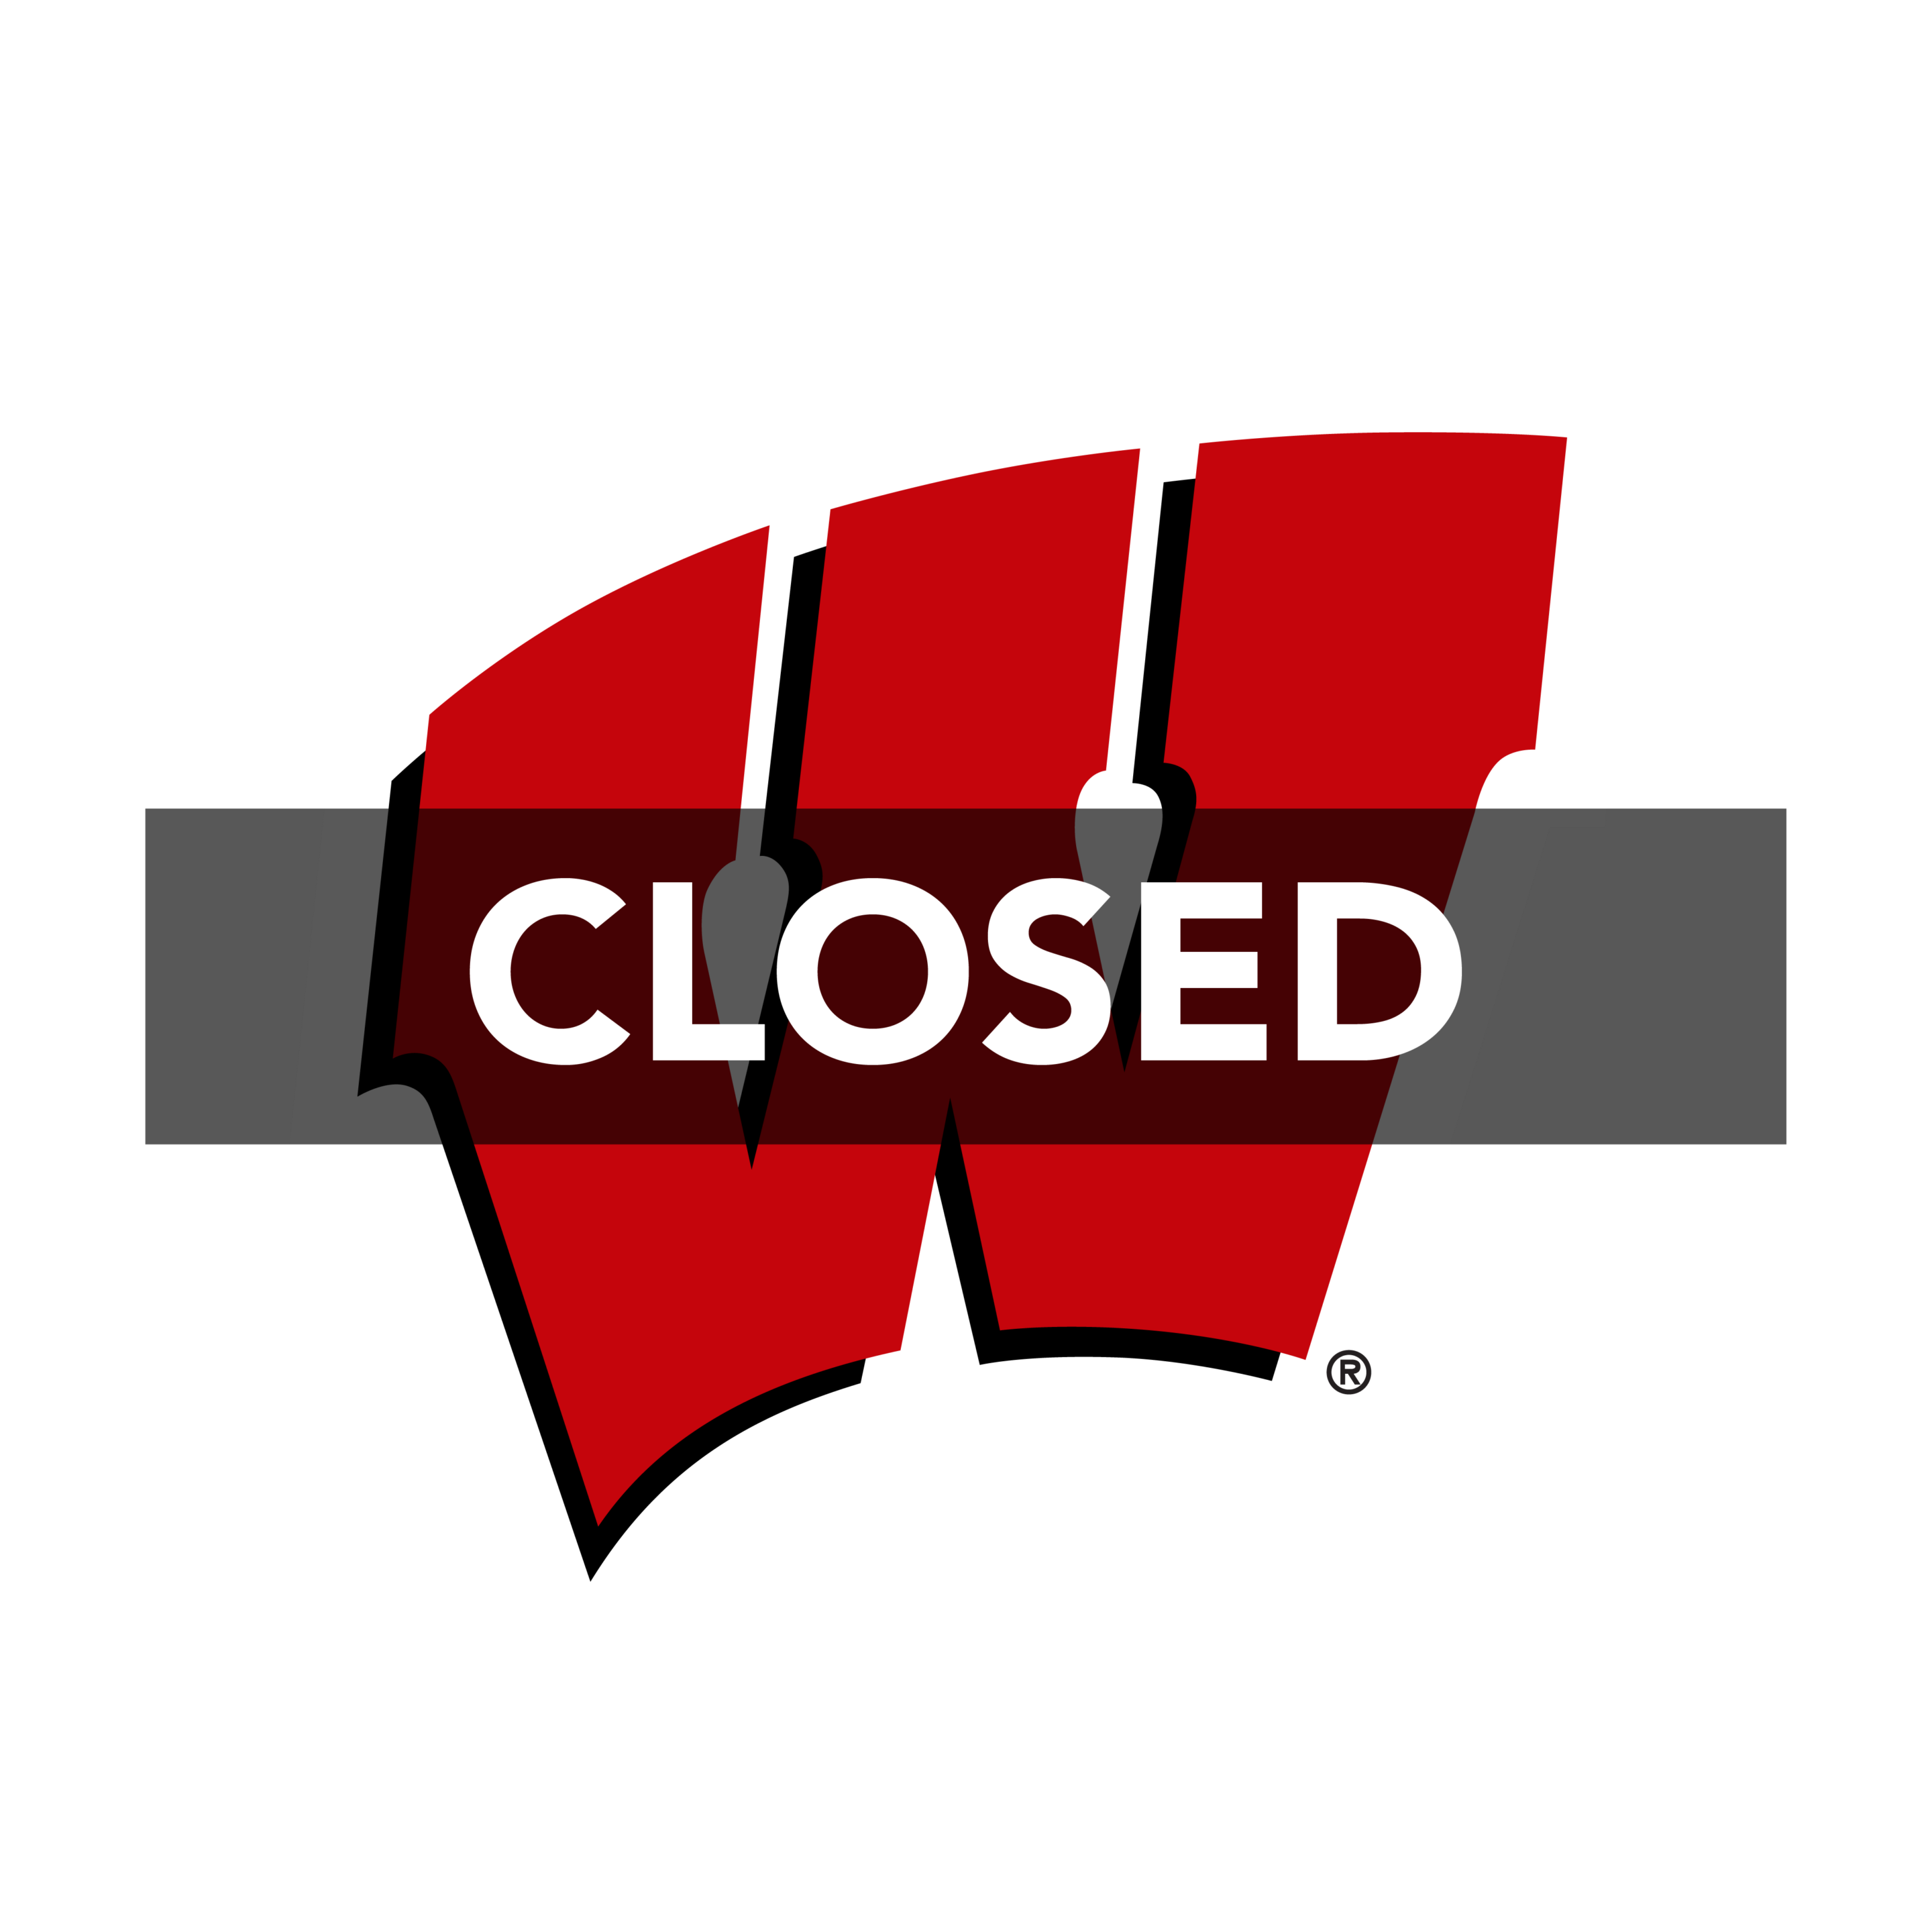 University of Wisconsin logo with "closed" banner representing that entries are closed